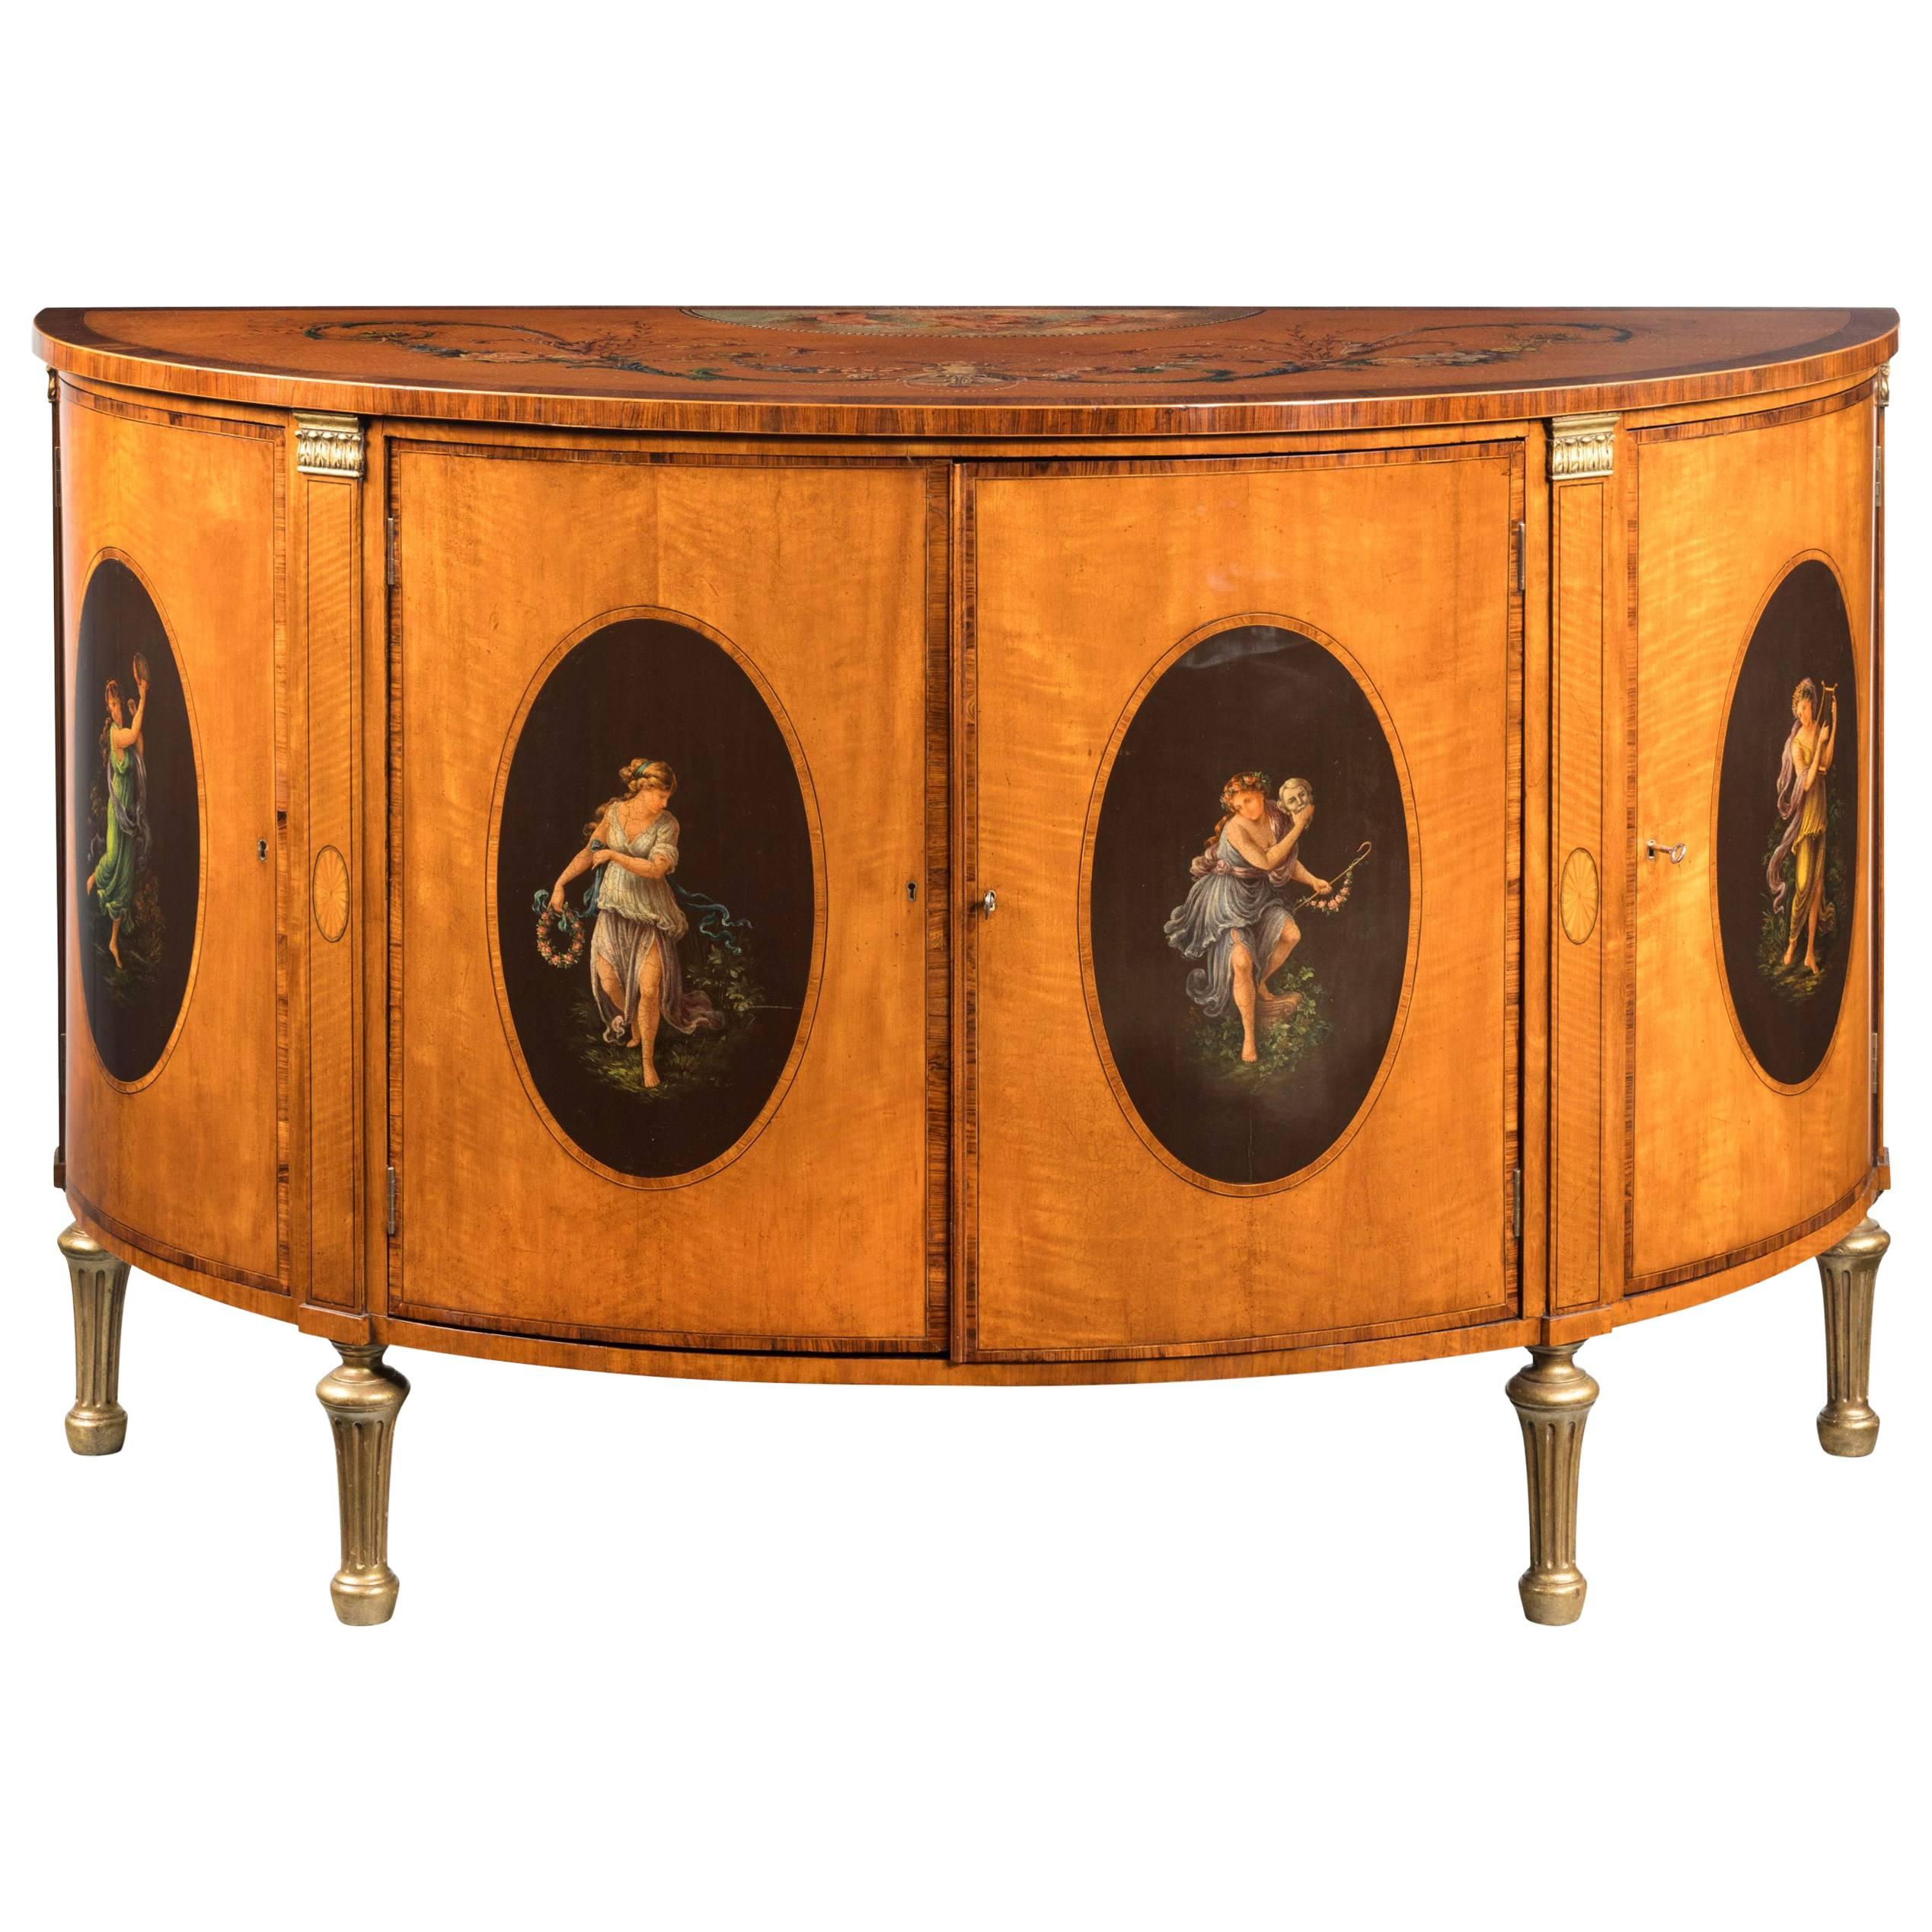 Late 19th Century Satinwood Demilune Commode